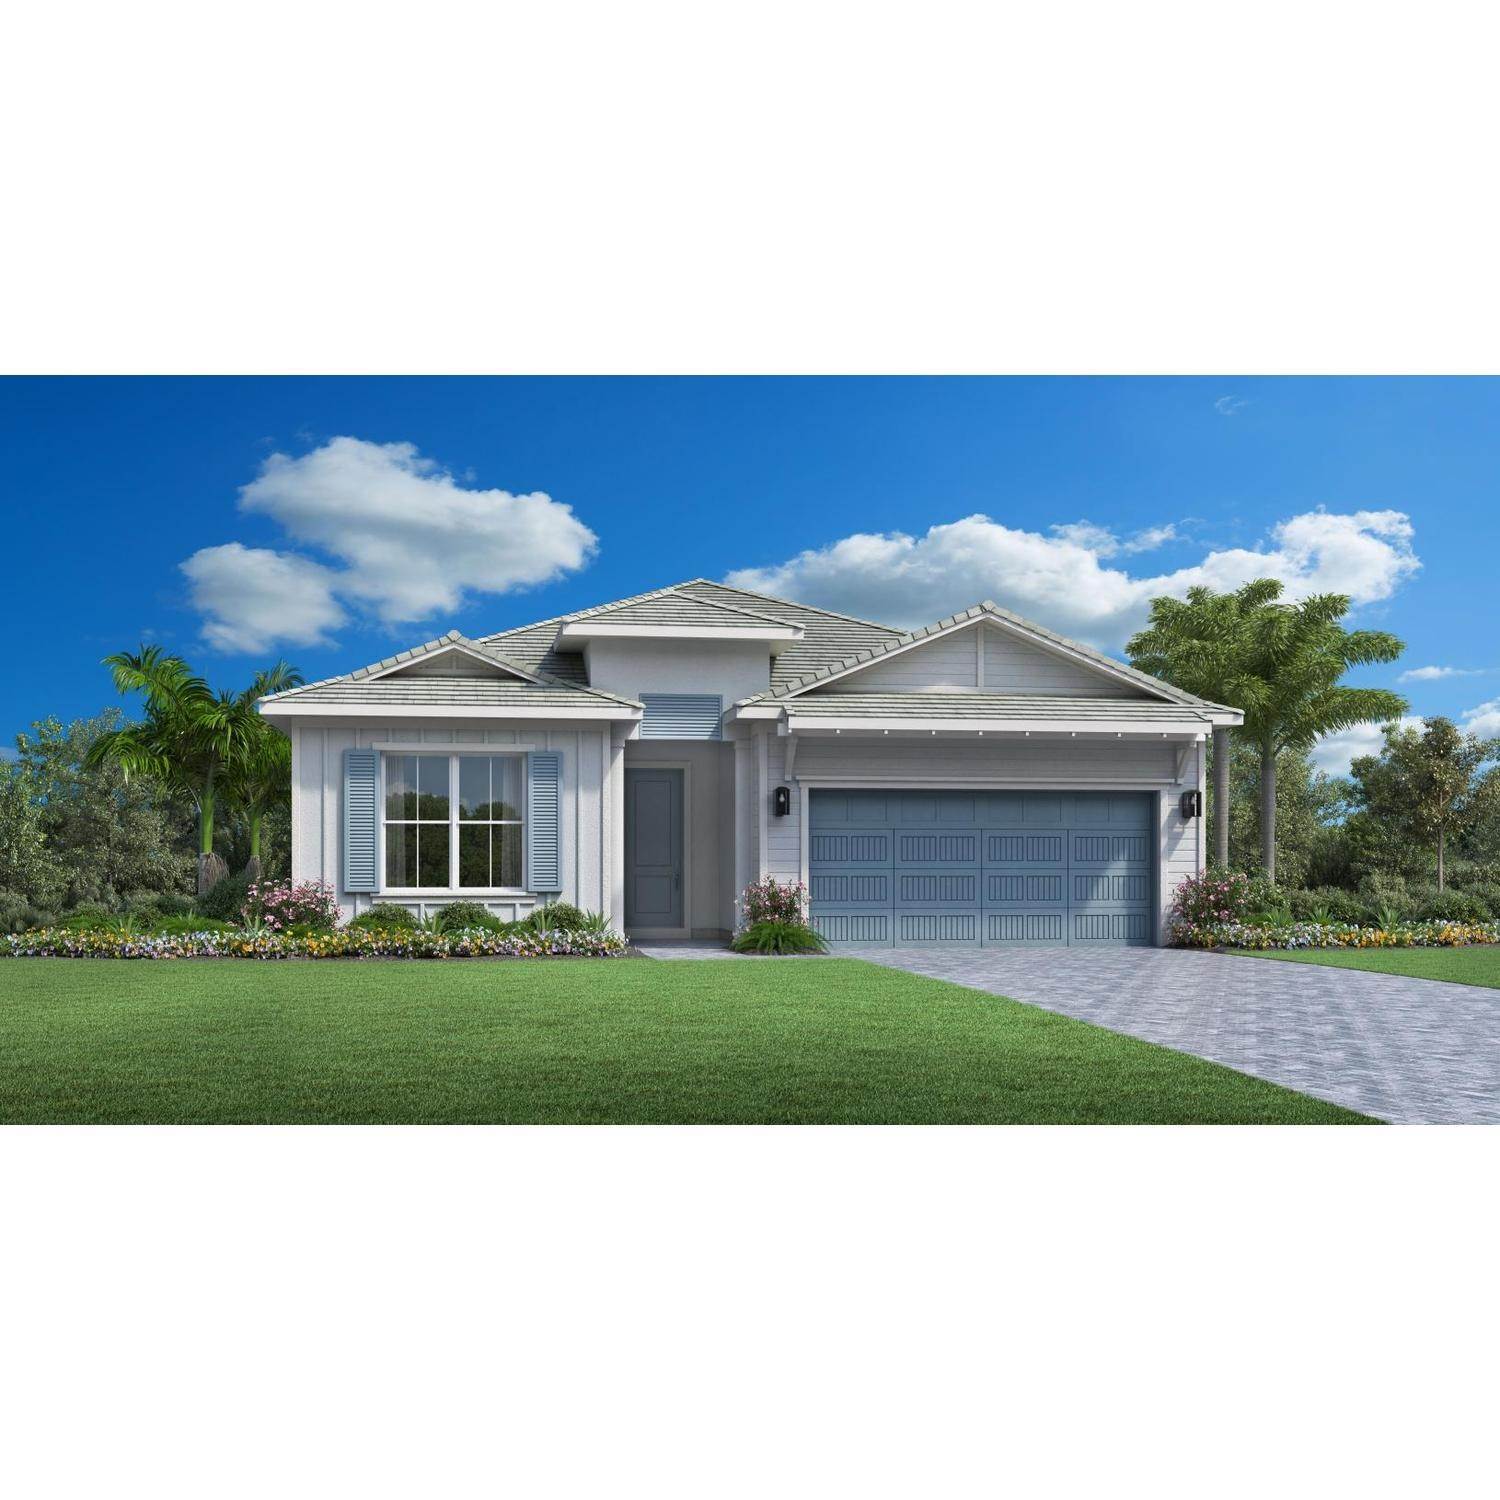 Single Family for Sale at Toll Brothers At Tesoro Club 126 SE Calmo Cir, Port St. Lucie, FL 34984